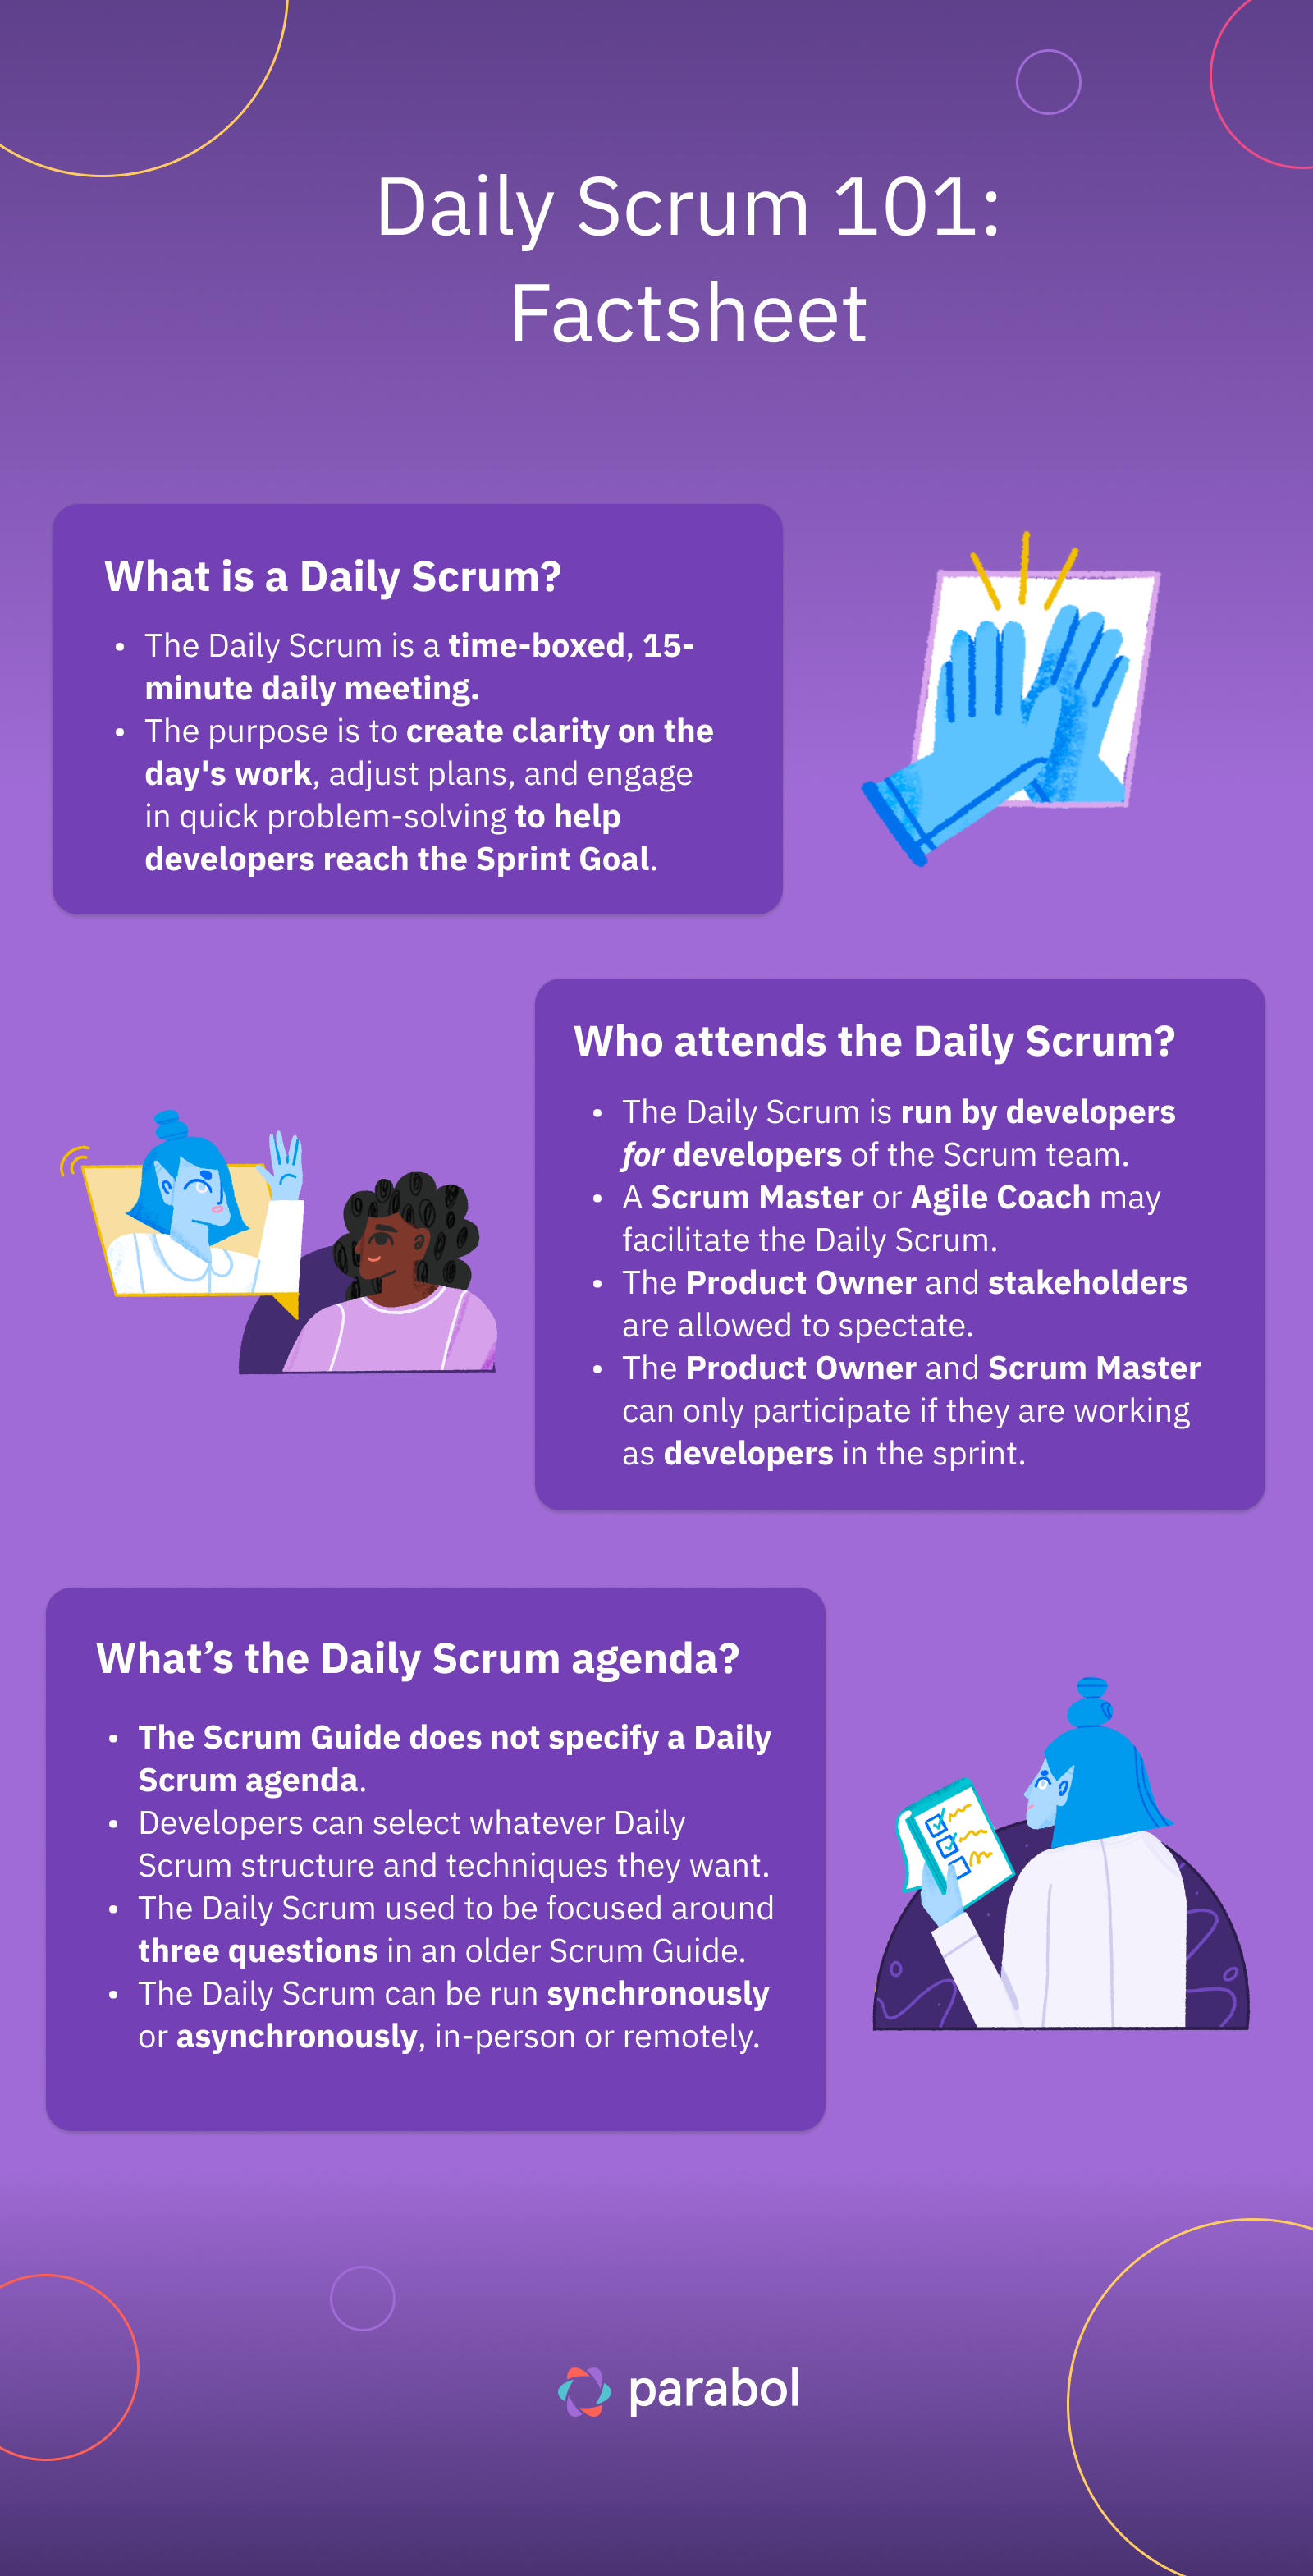 an infographic that shows the key facts about daily scrums outlined in the text of this article. 